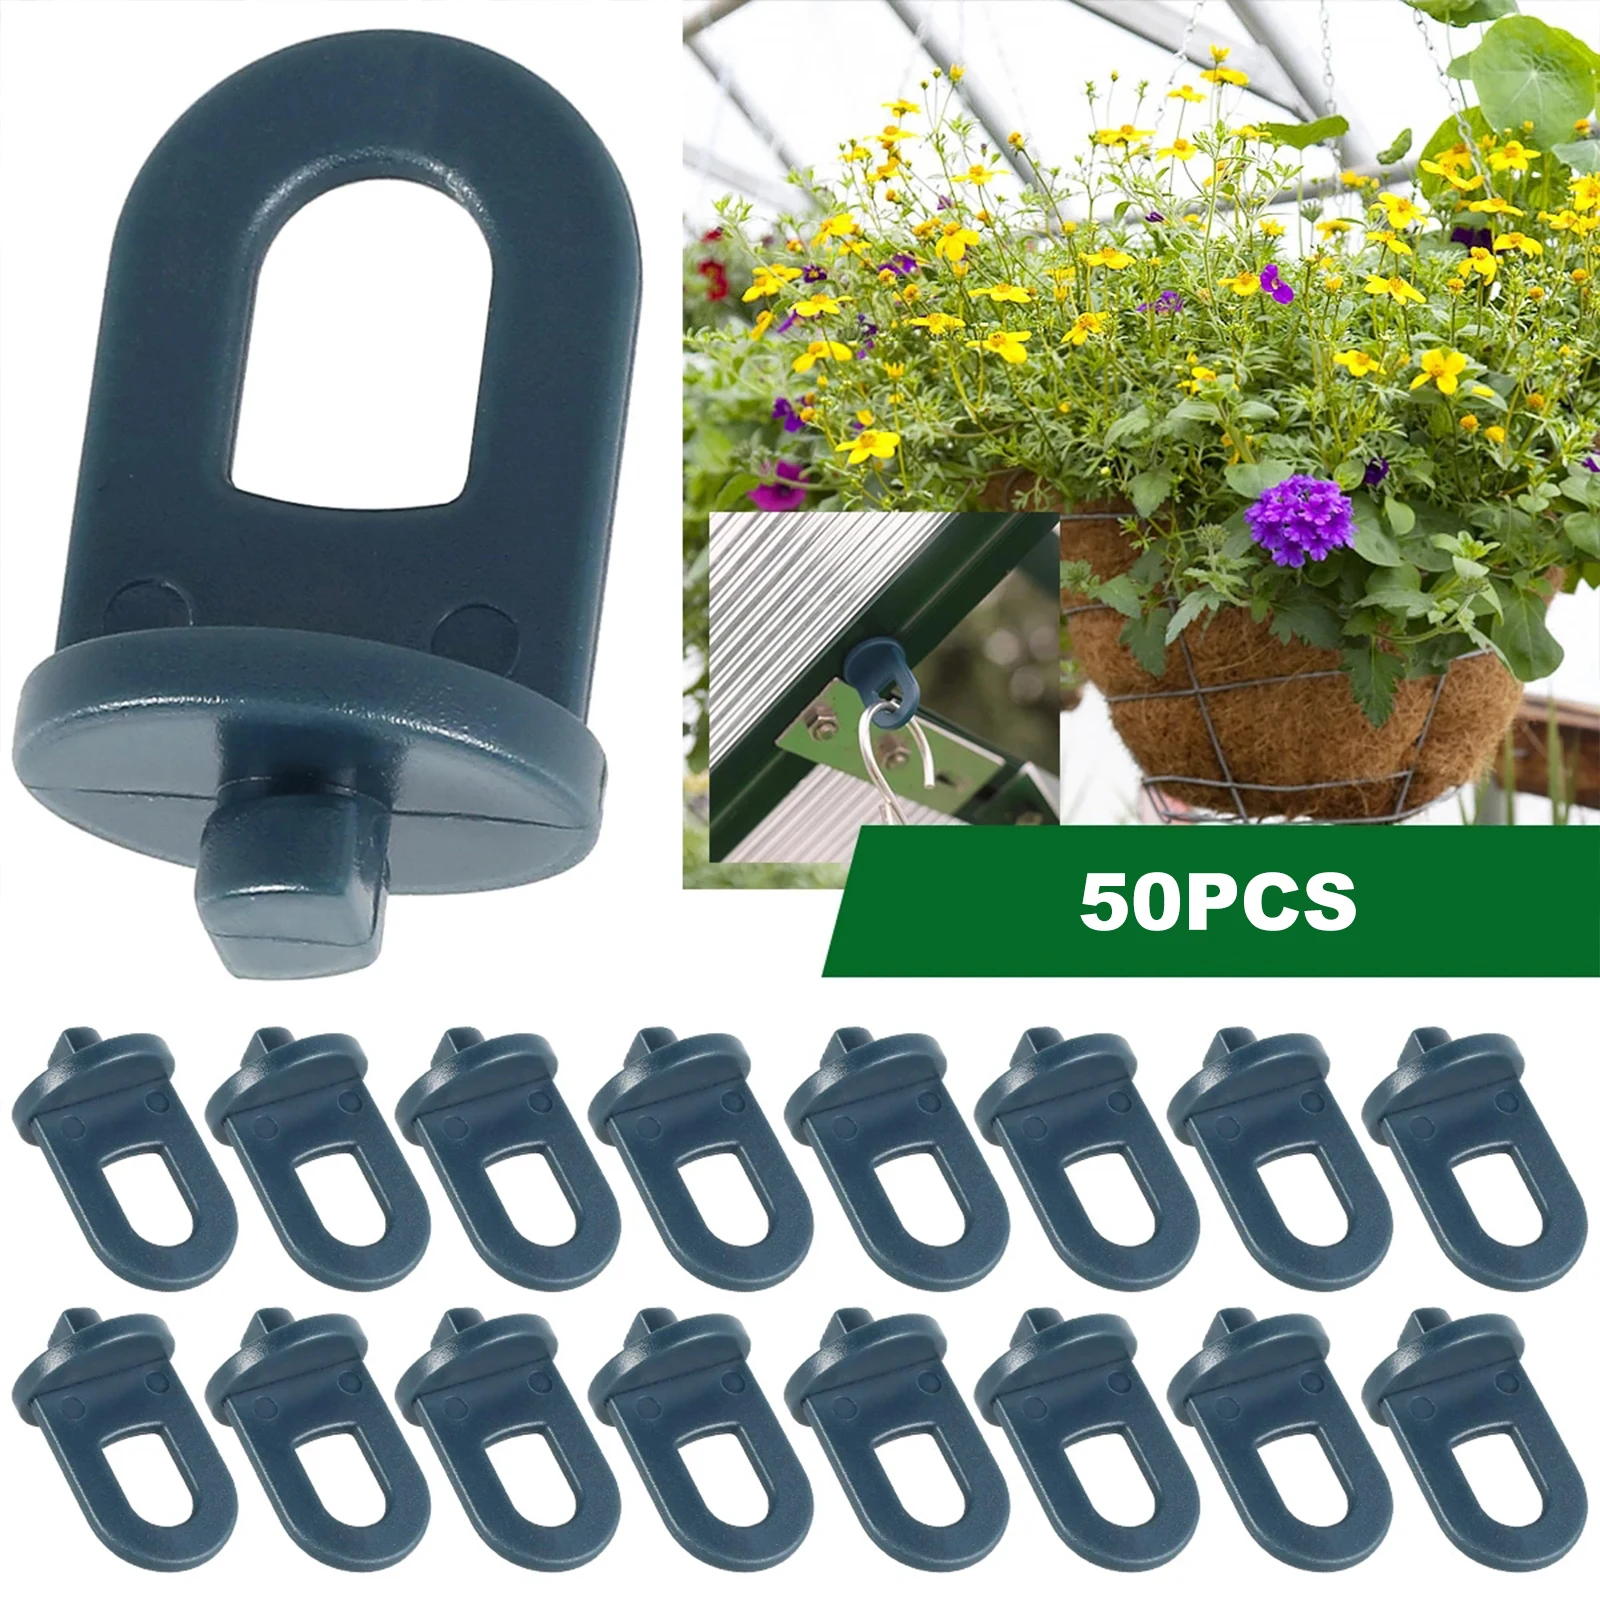 

50Pcs Greenhouse Hanging Hooks Fastener Tied Buckle Hook Plant Vegetable Grafting Clip Greenhouse Clamp Stand Vine Clips